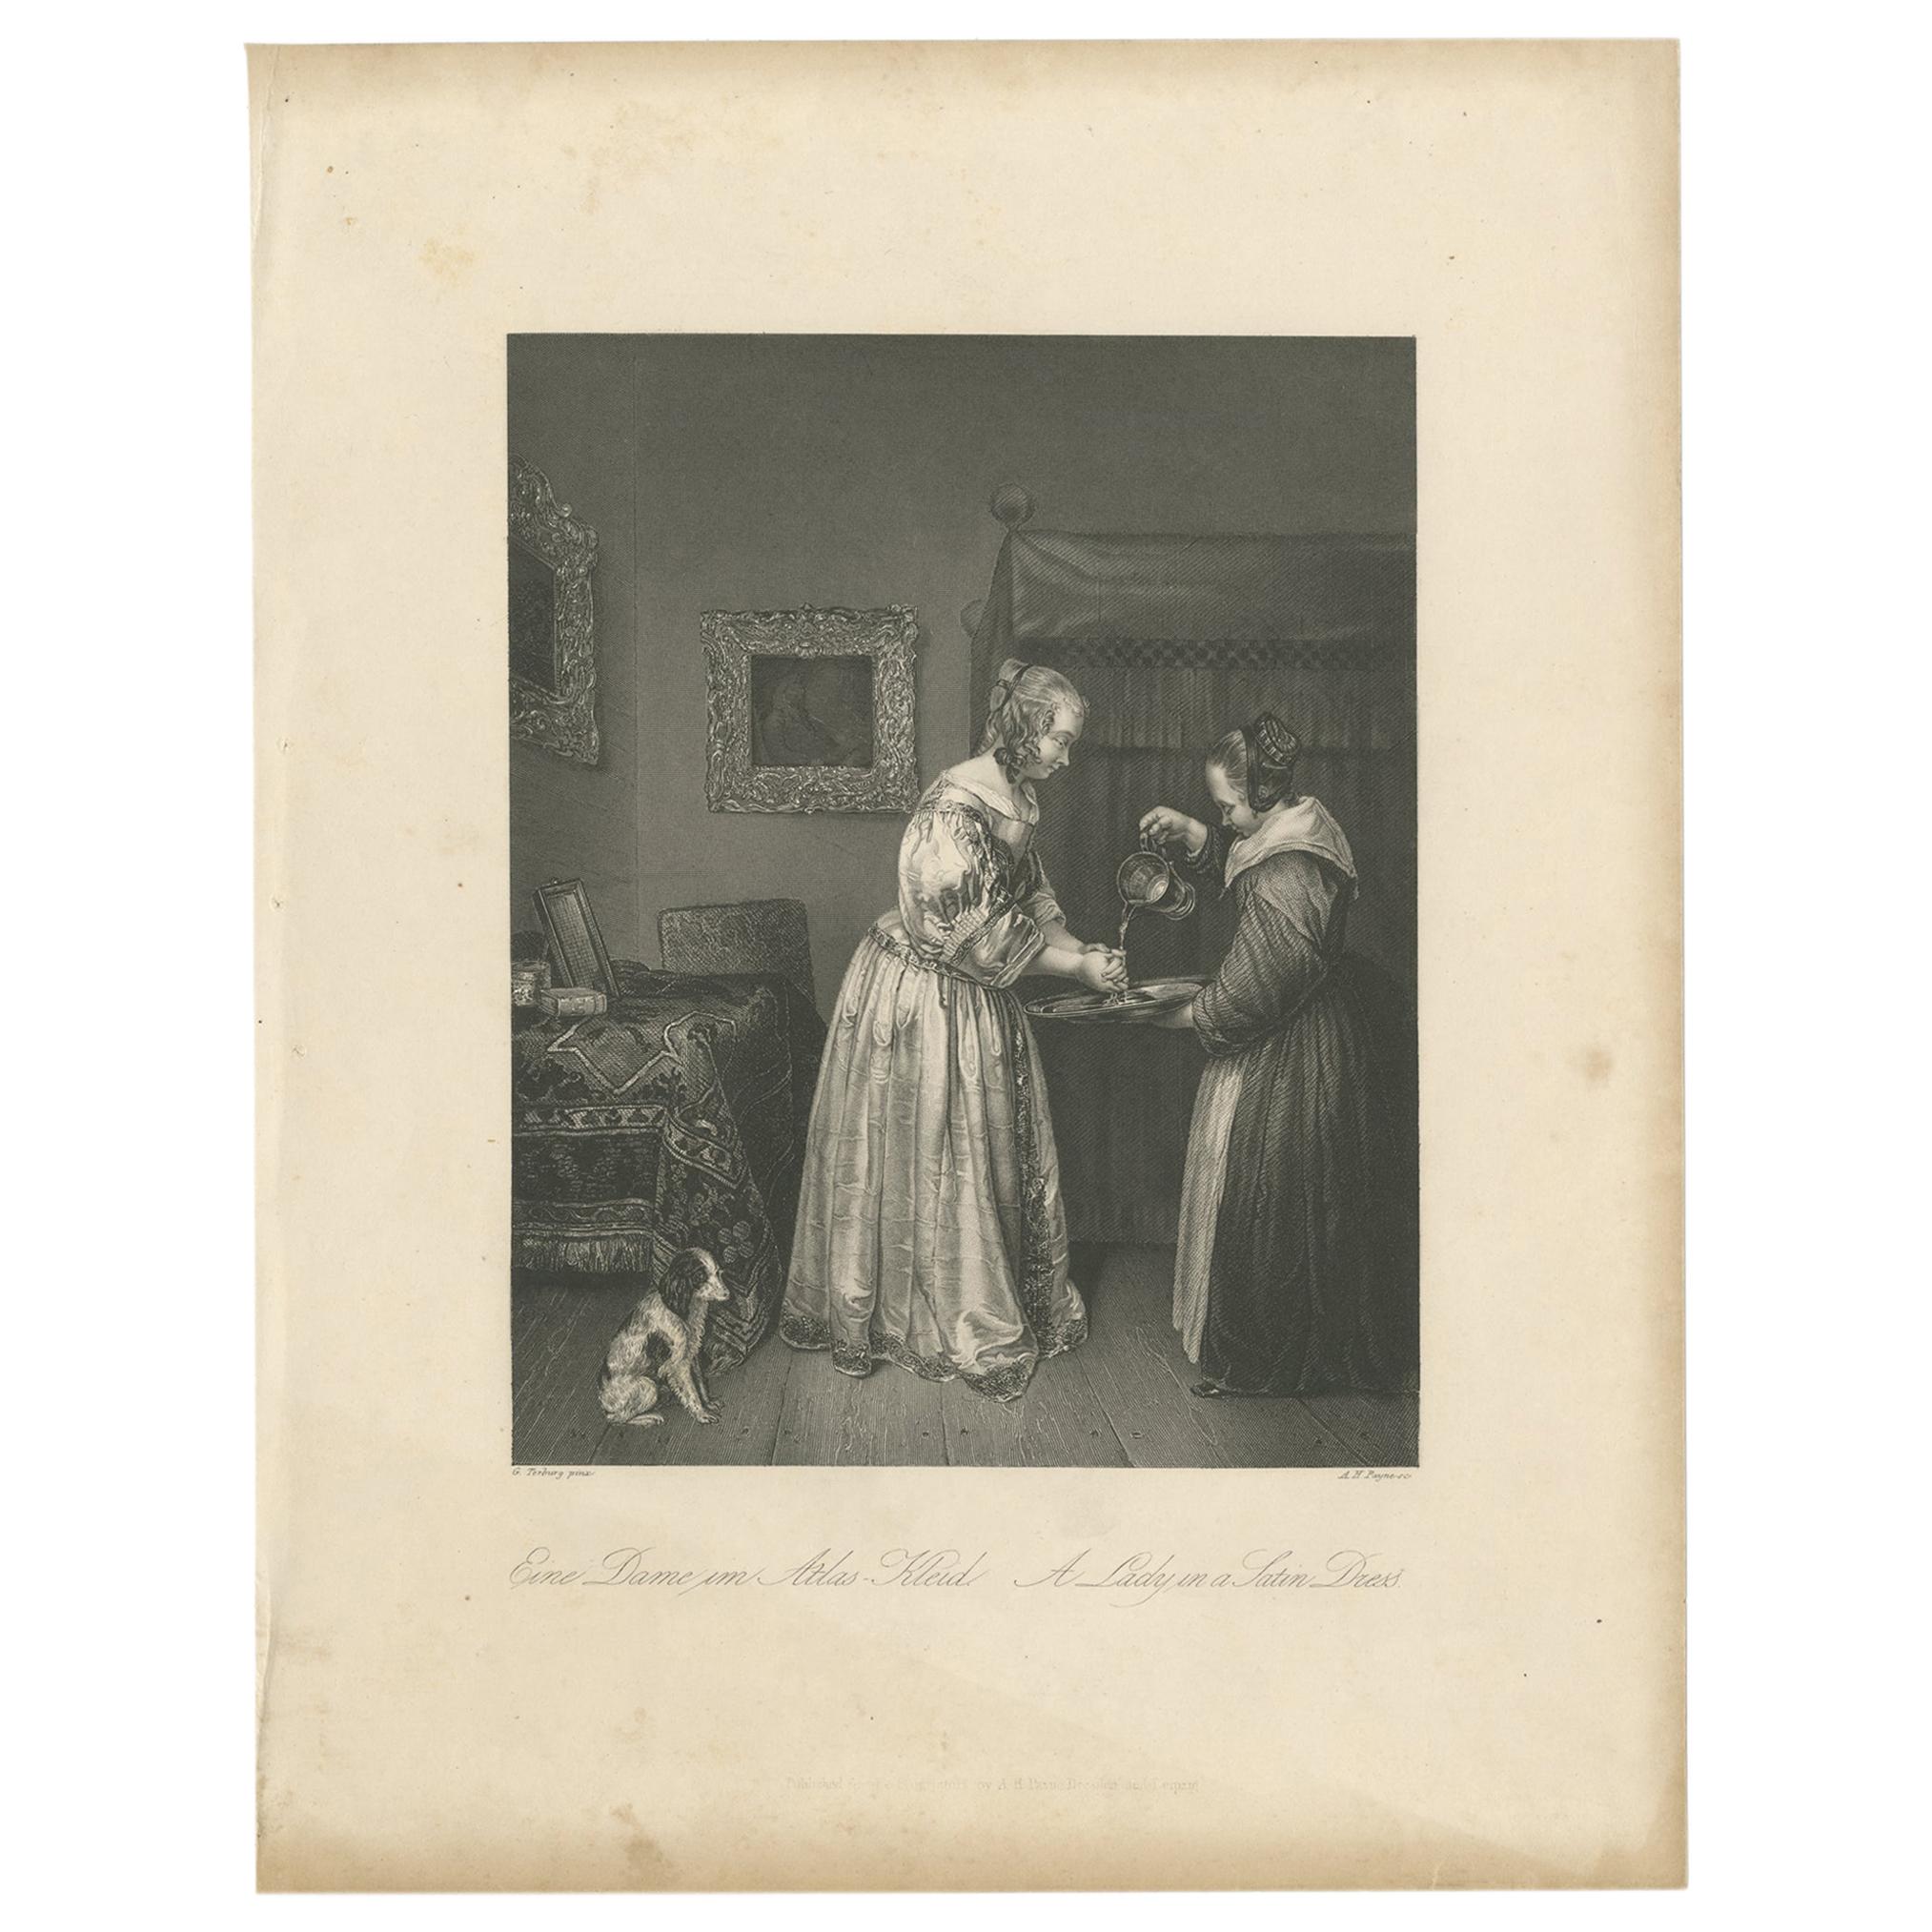 Antique Print of a Lady in a Satin Dress by Payne 'c.1860'